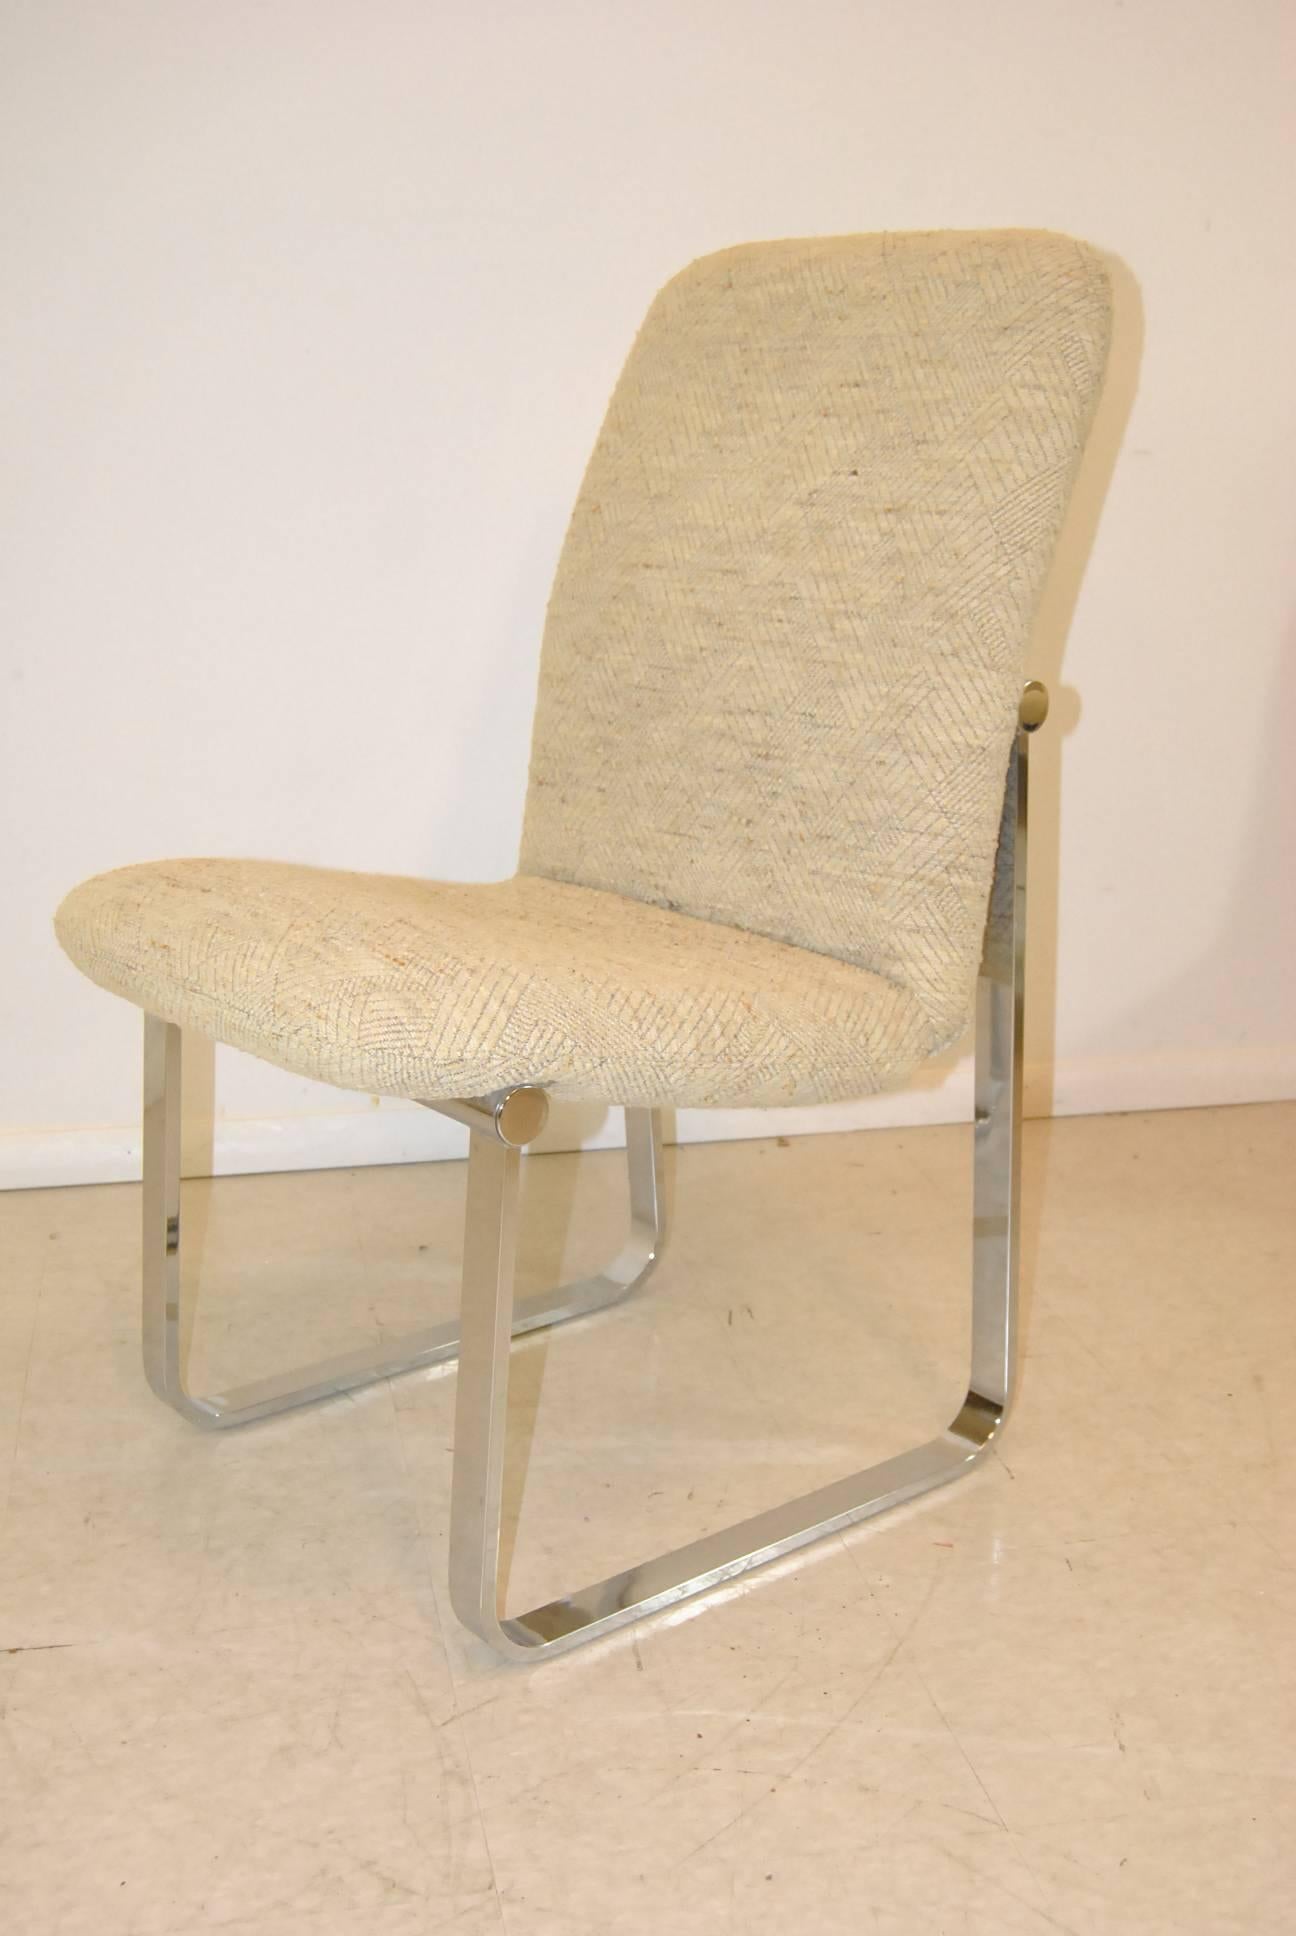 A great set of six D.I.A. dining room chairs. They feature heavy chrome frames and a very pleasant wool upholstery. Very good condition with one chrome disc missing from one chair. The upholstery is in excellent condition with no stains. The